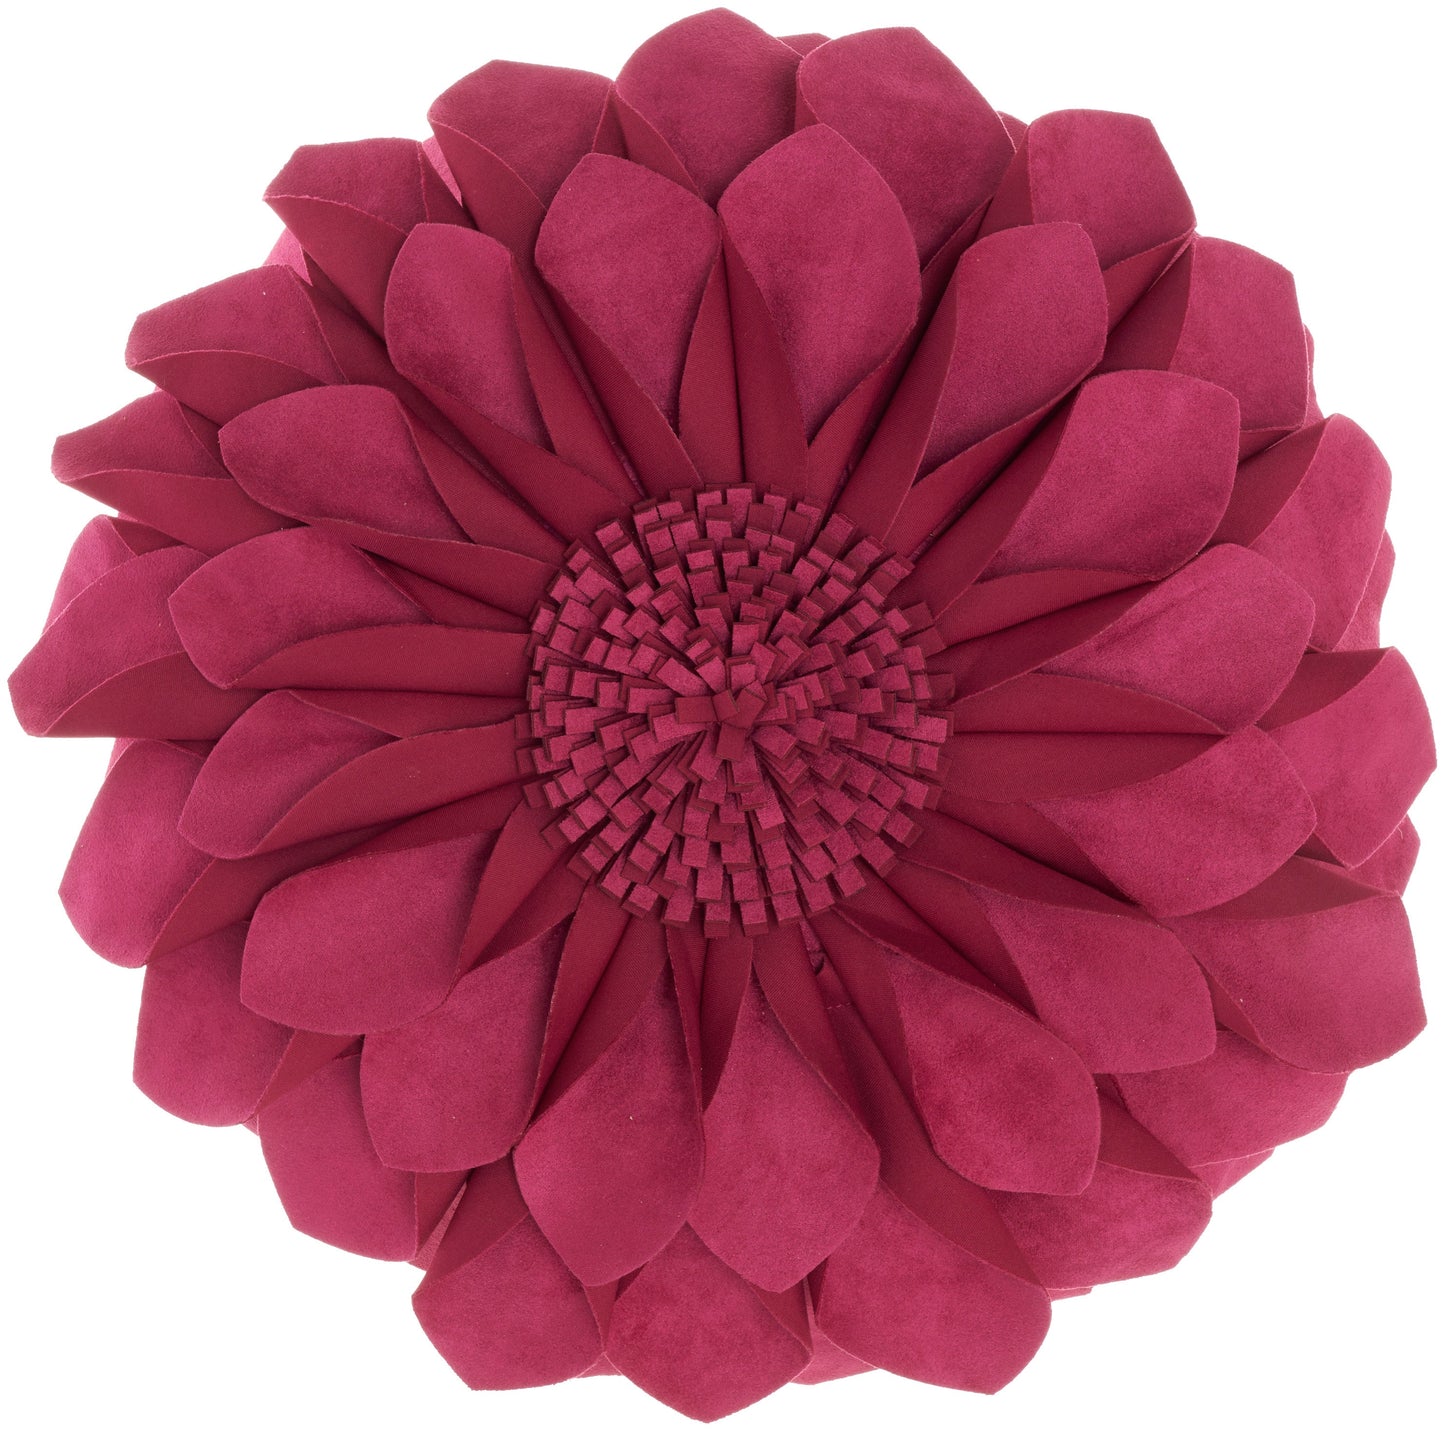 Sofia L0374 Synthetic Blend Suedette Flower Throw Pillow From Mina Victory By Nourison Rugs